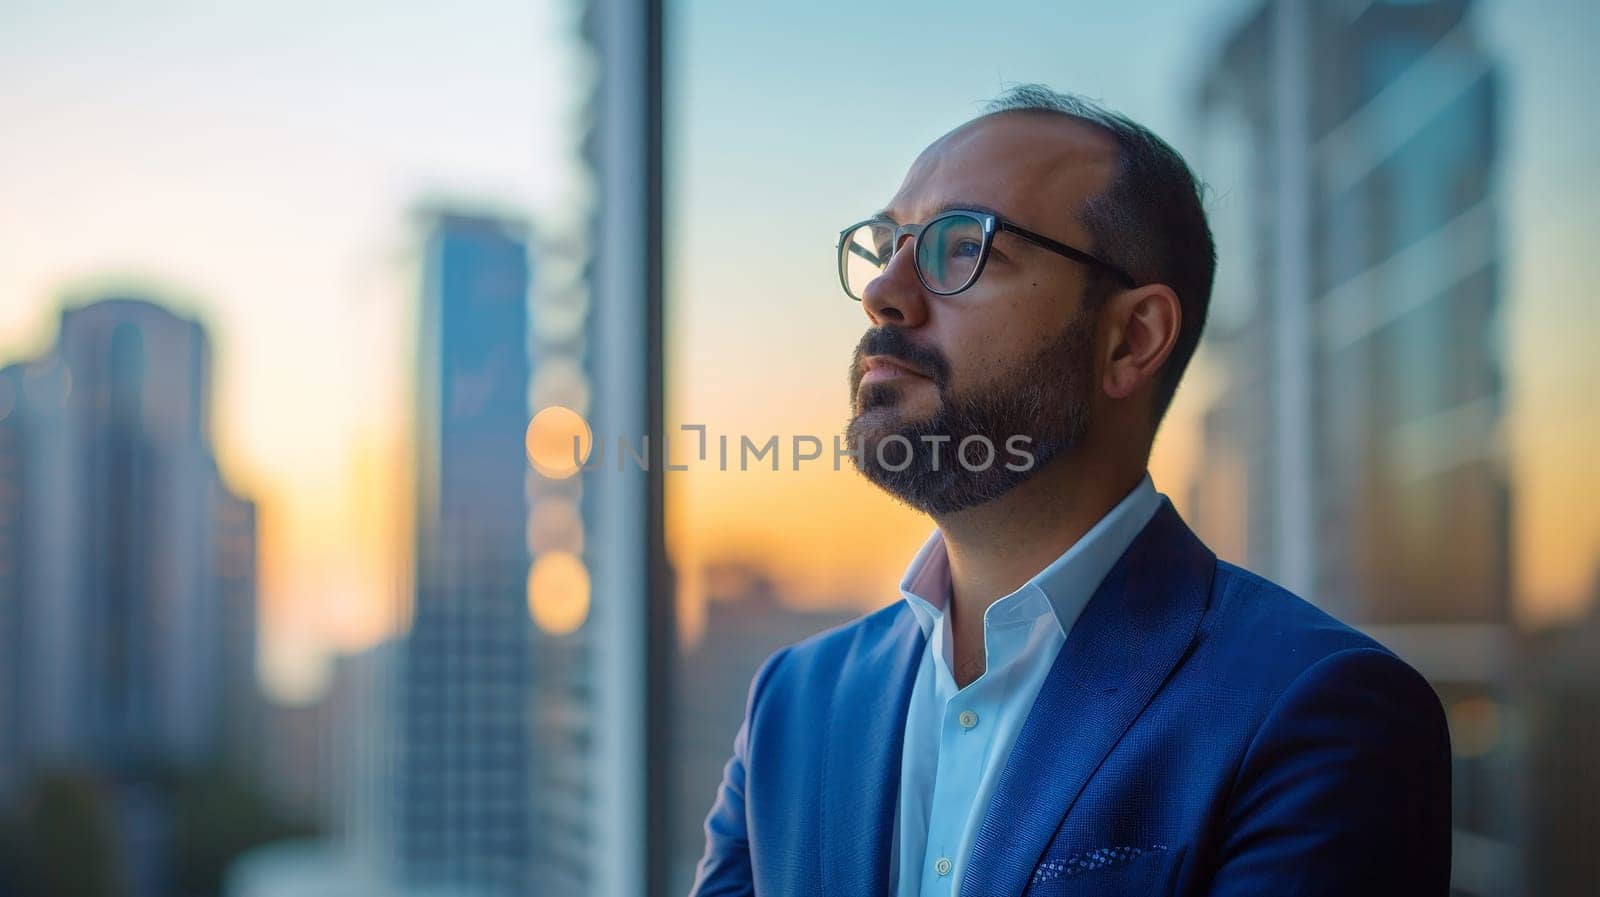 A man in a blue suit and glasses is looking out the window at the city skyline. Concept of contemplation and reflection as the man gazes out at the bustling city below